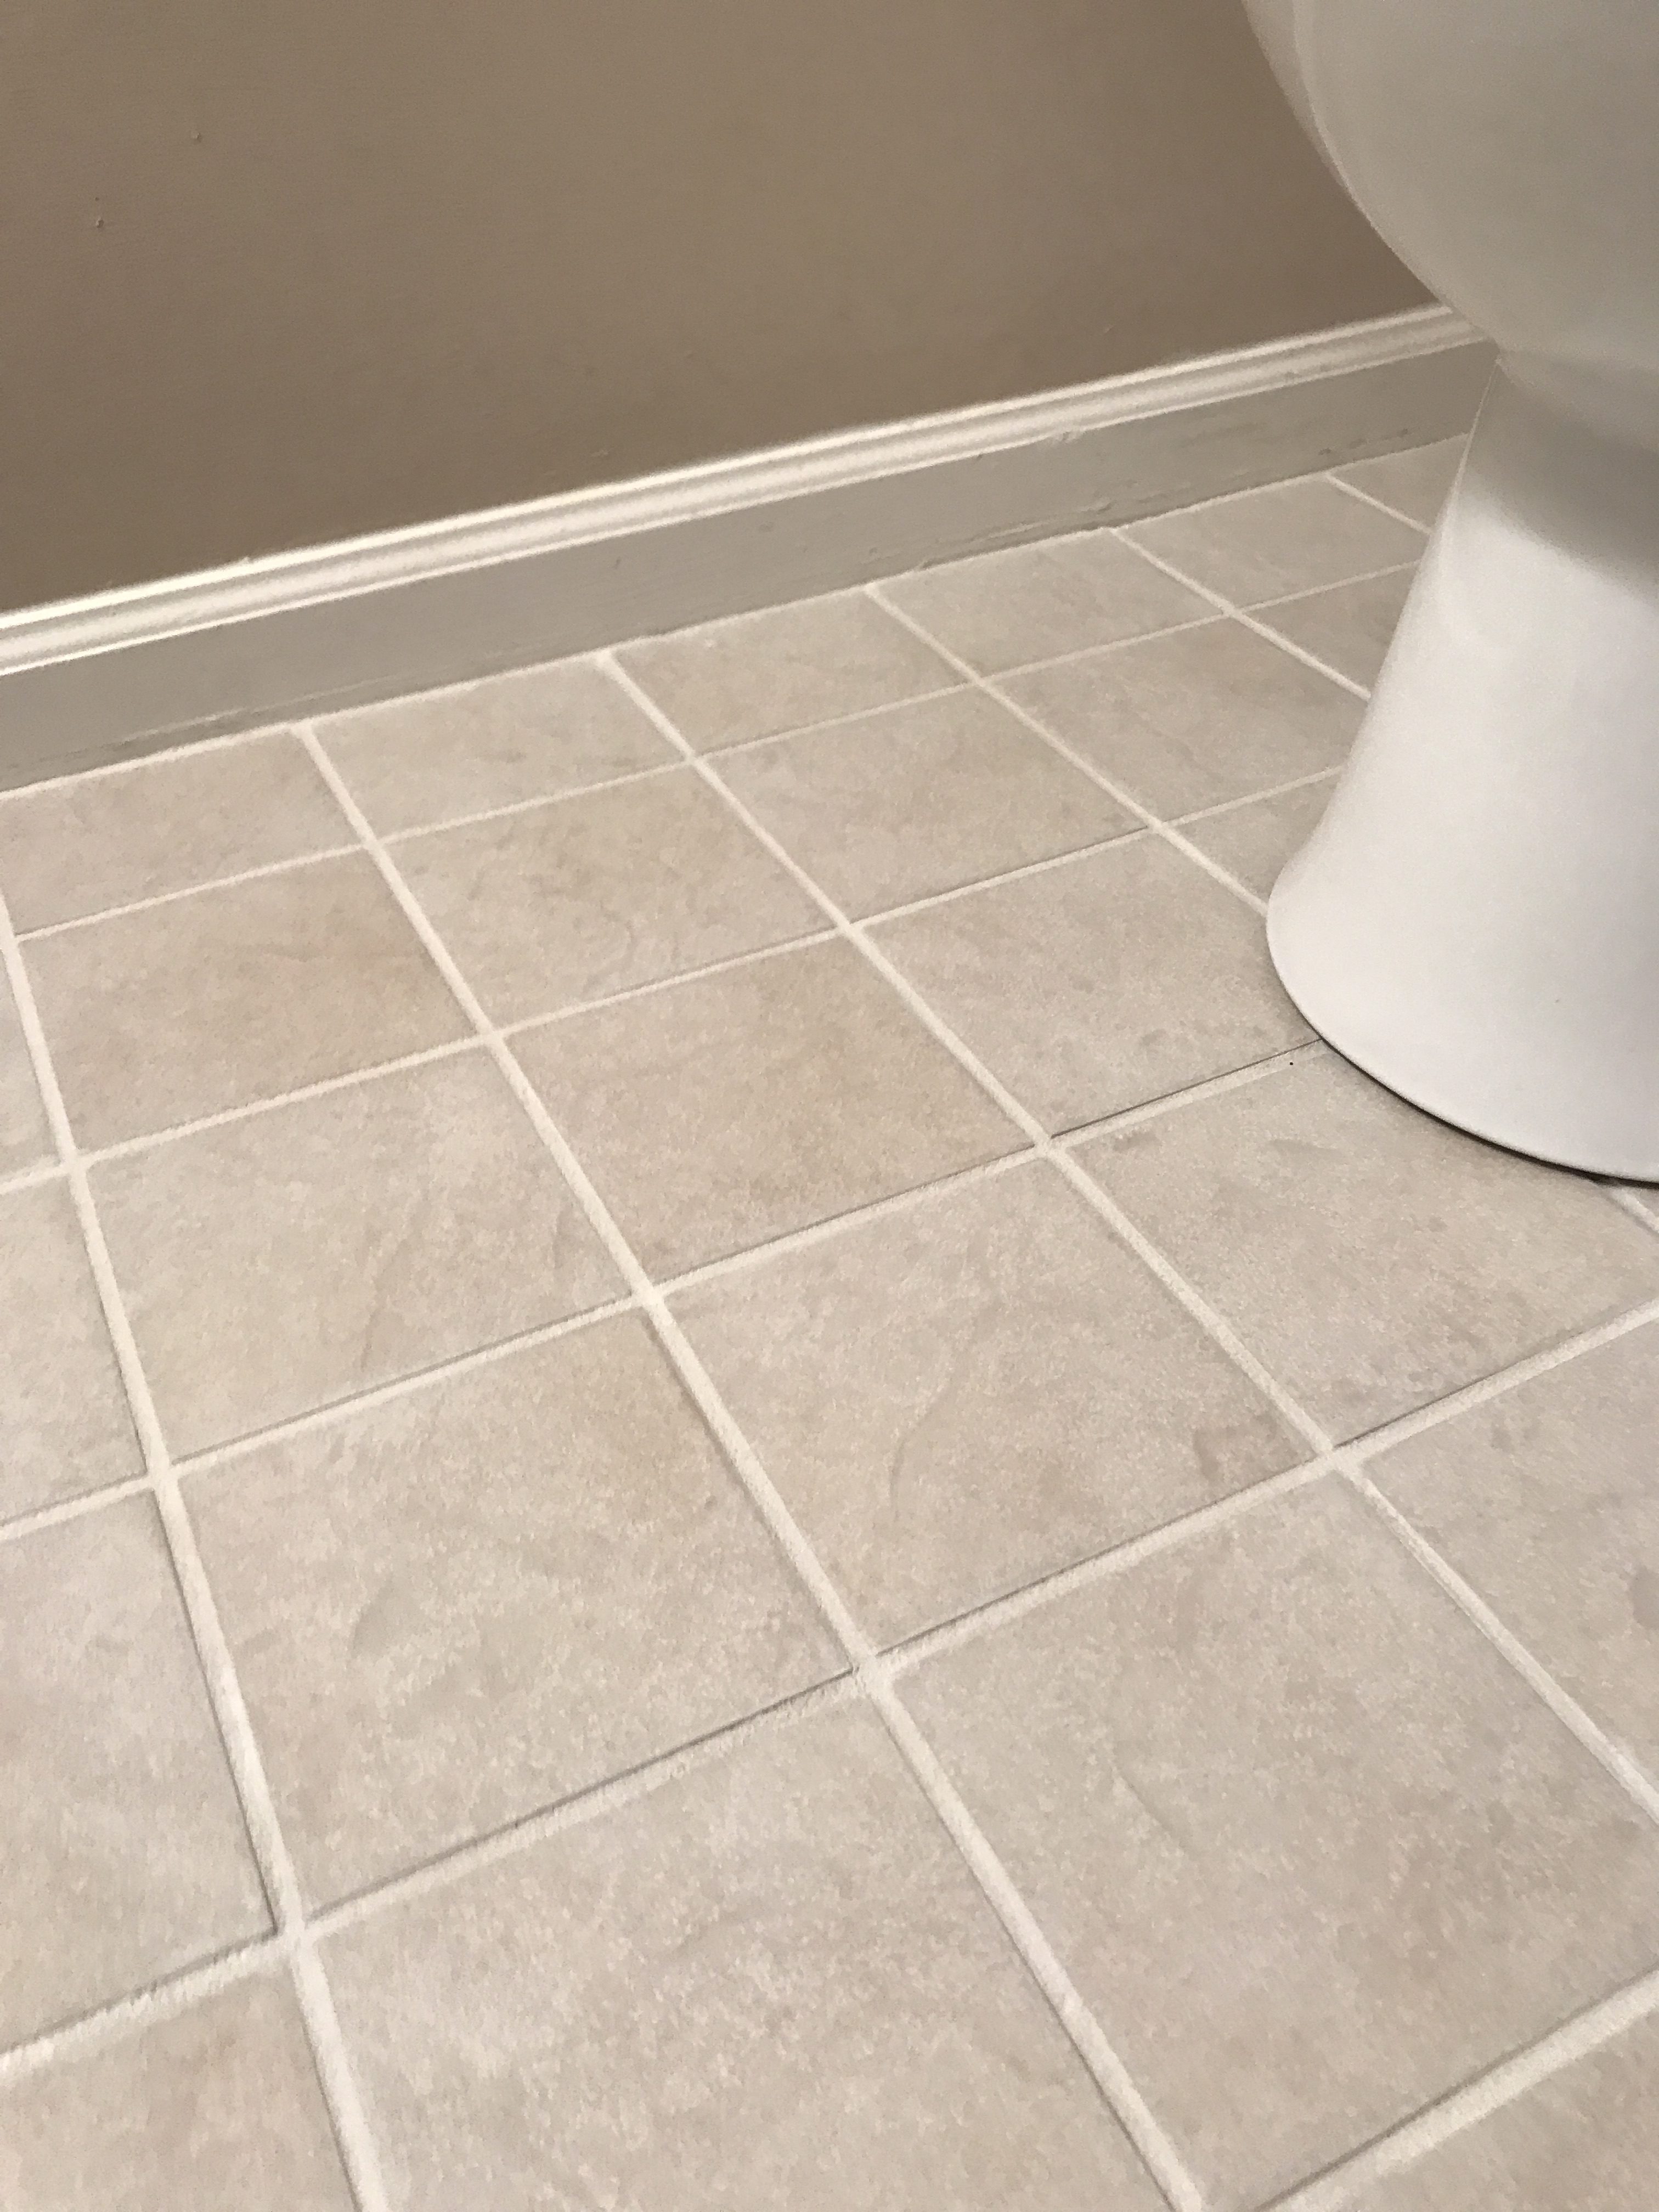 Ugly Grout Without Ripping Up Your Tile, Cover Ugly Tile Floor